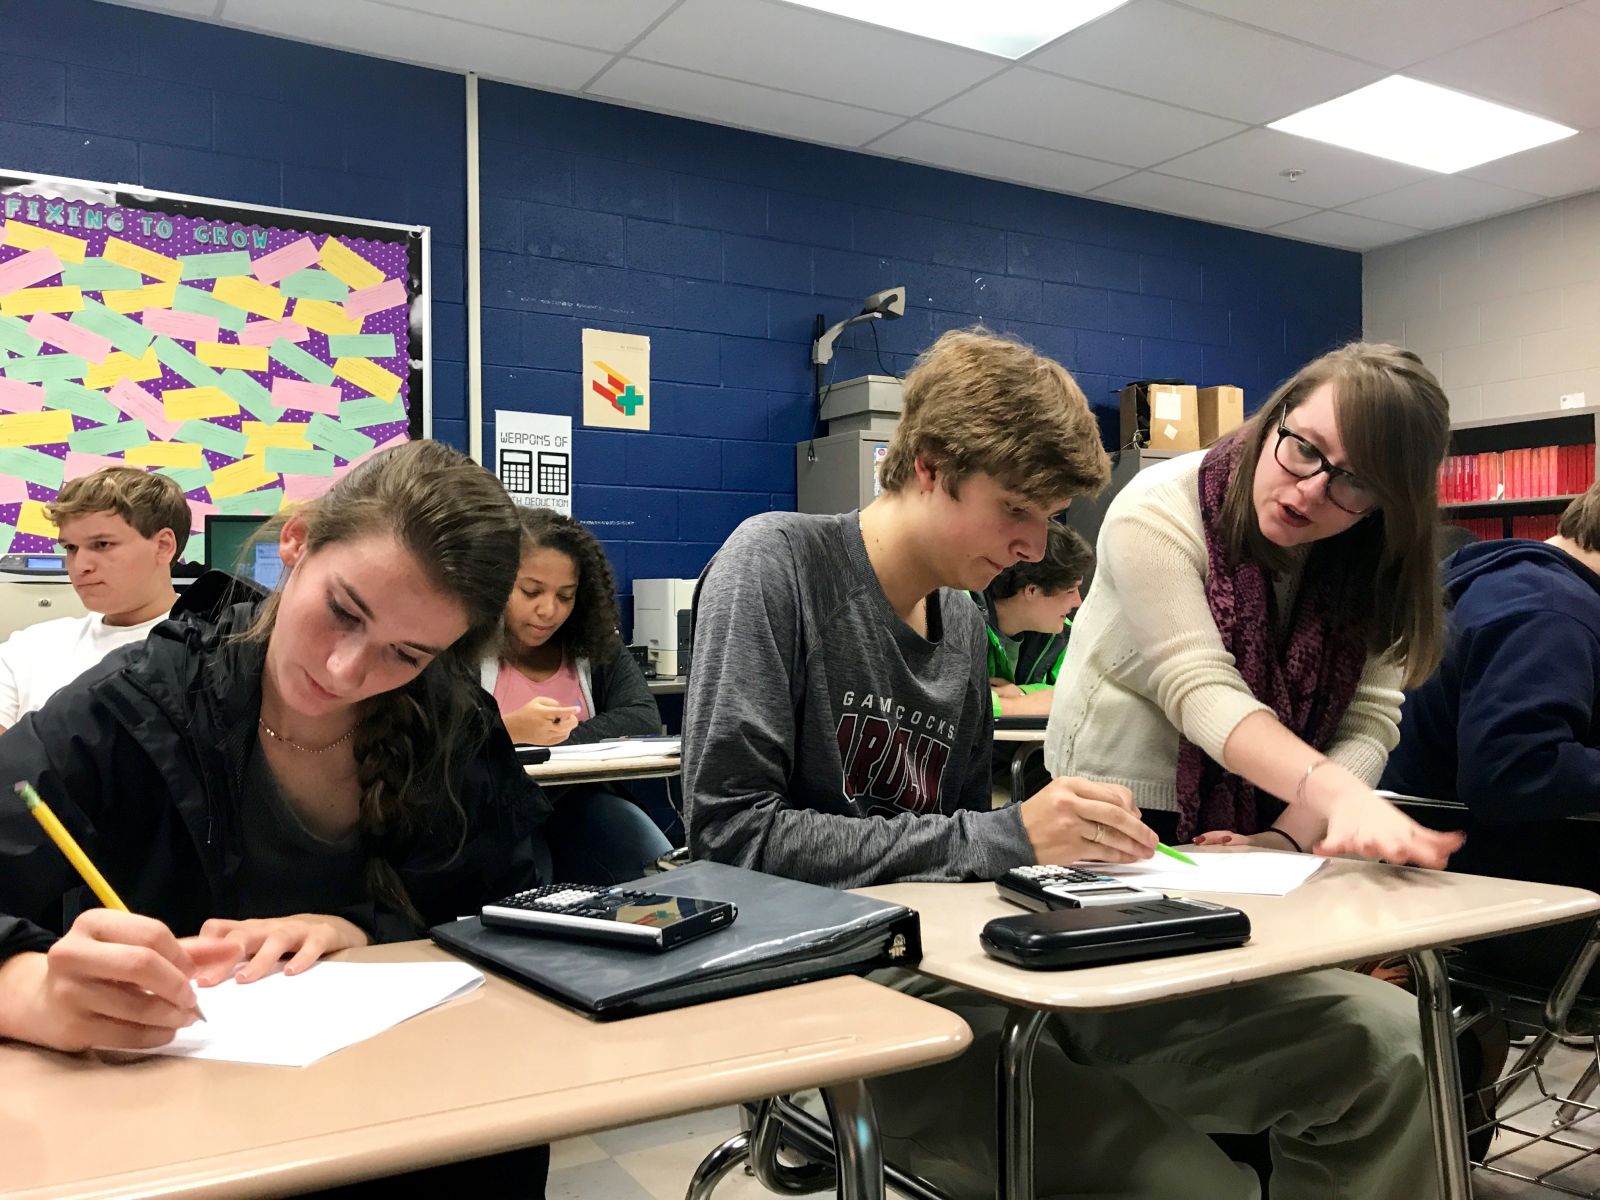 Alison Schriro (right), a math teacher at Dreher High School, is in her second year of the three-year Carolina Teacher Induction Program, which provides support to recent USC education graduates. (Photo/University of South Carolina)